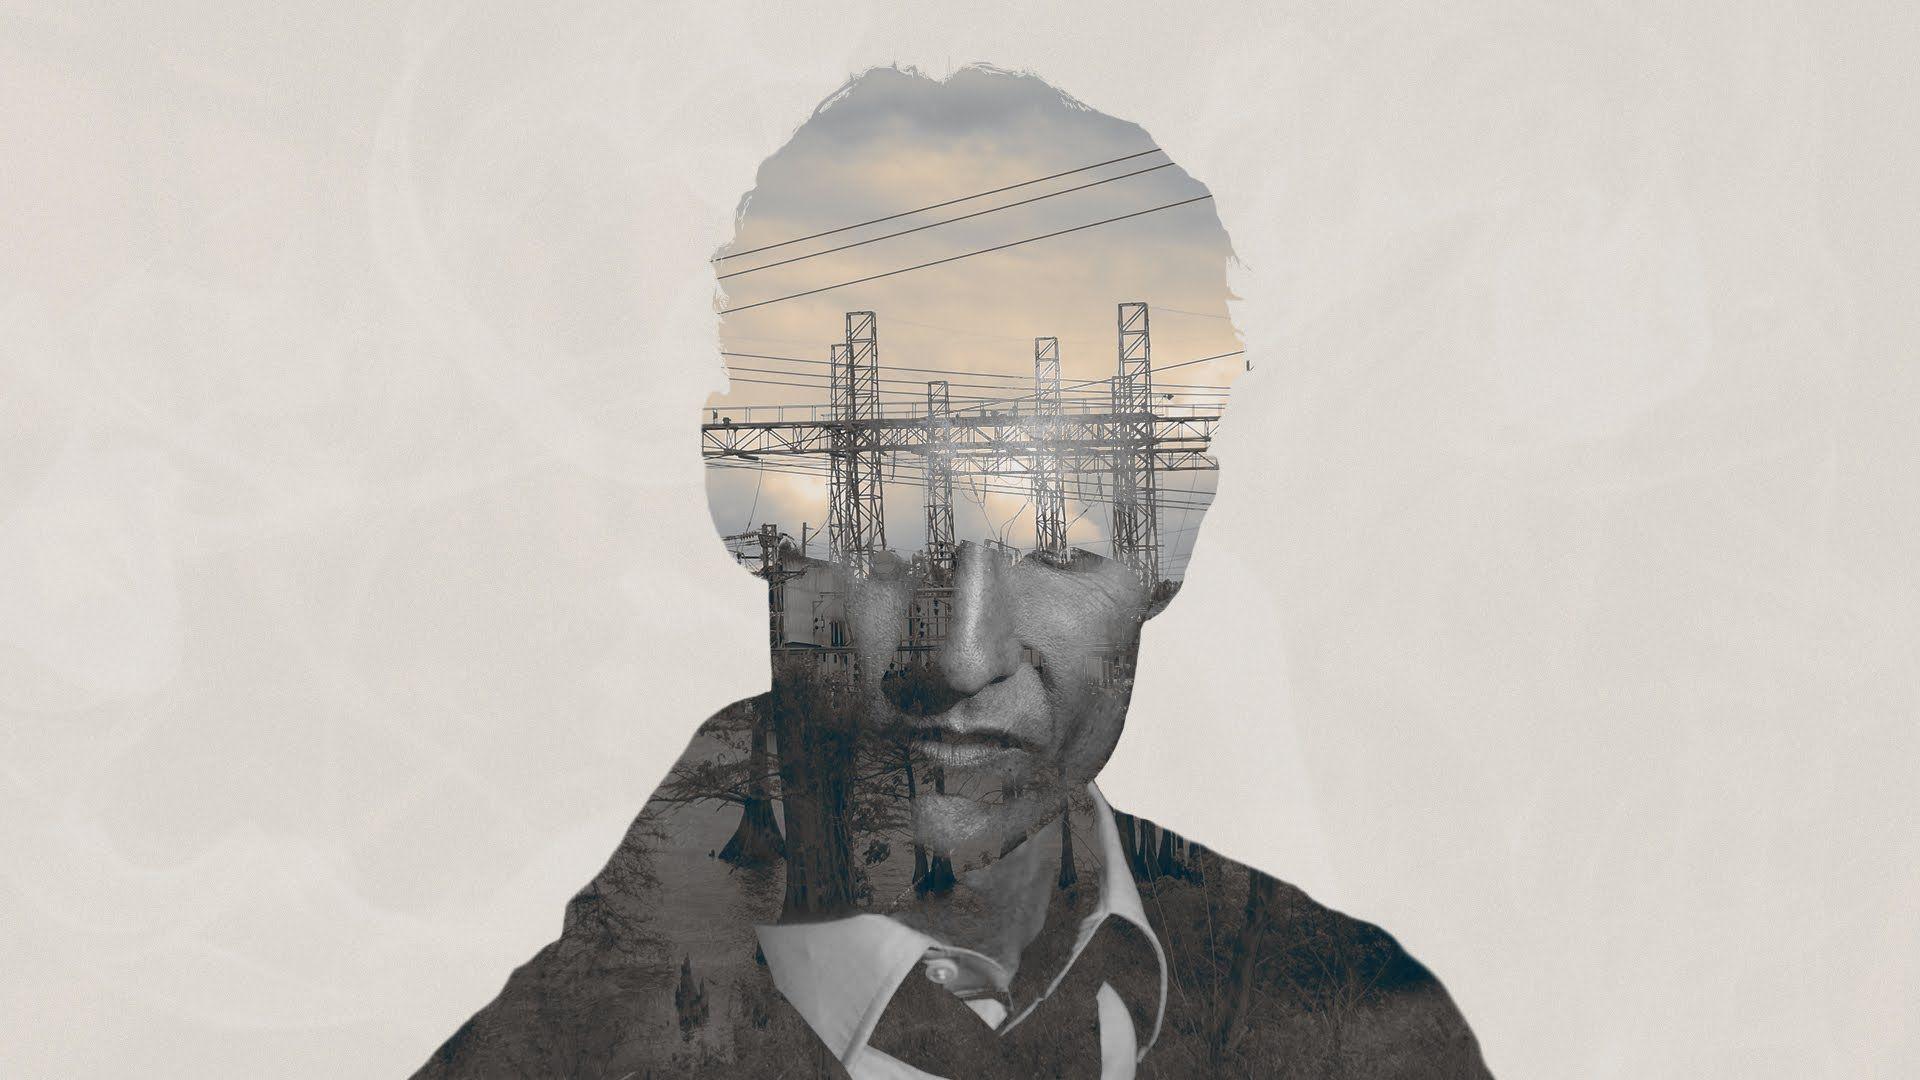 True Detective Wallpaper High Resolution and Quality Download